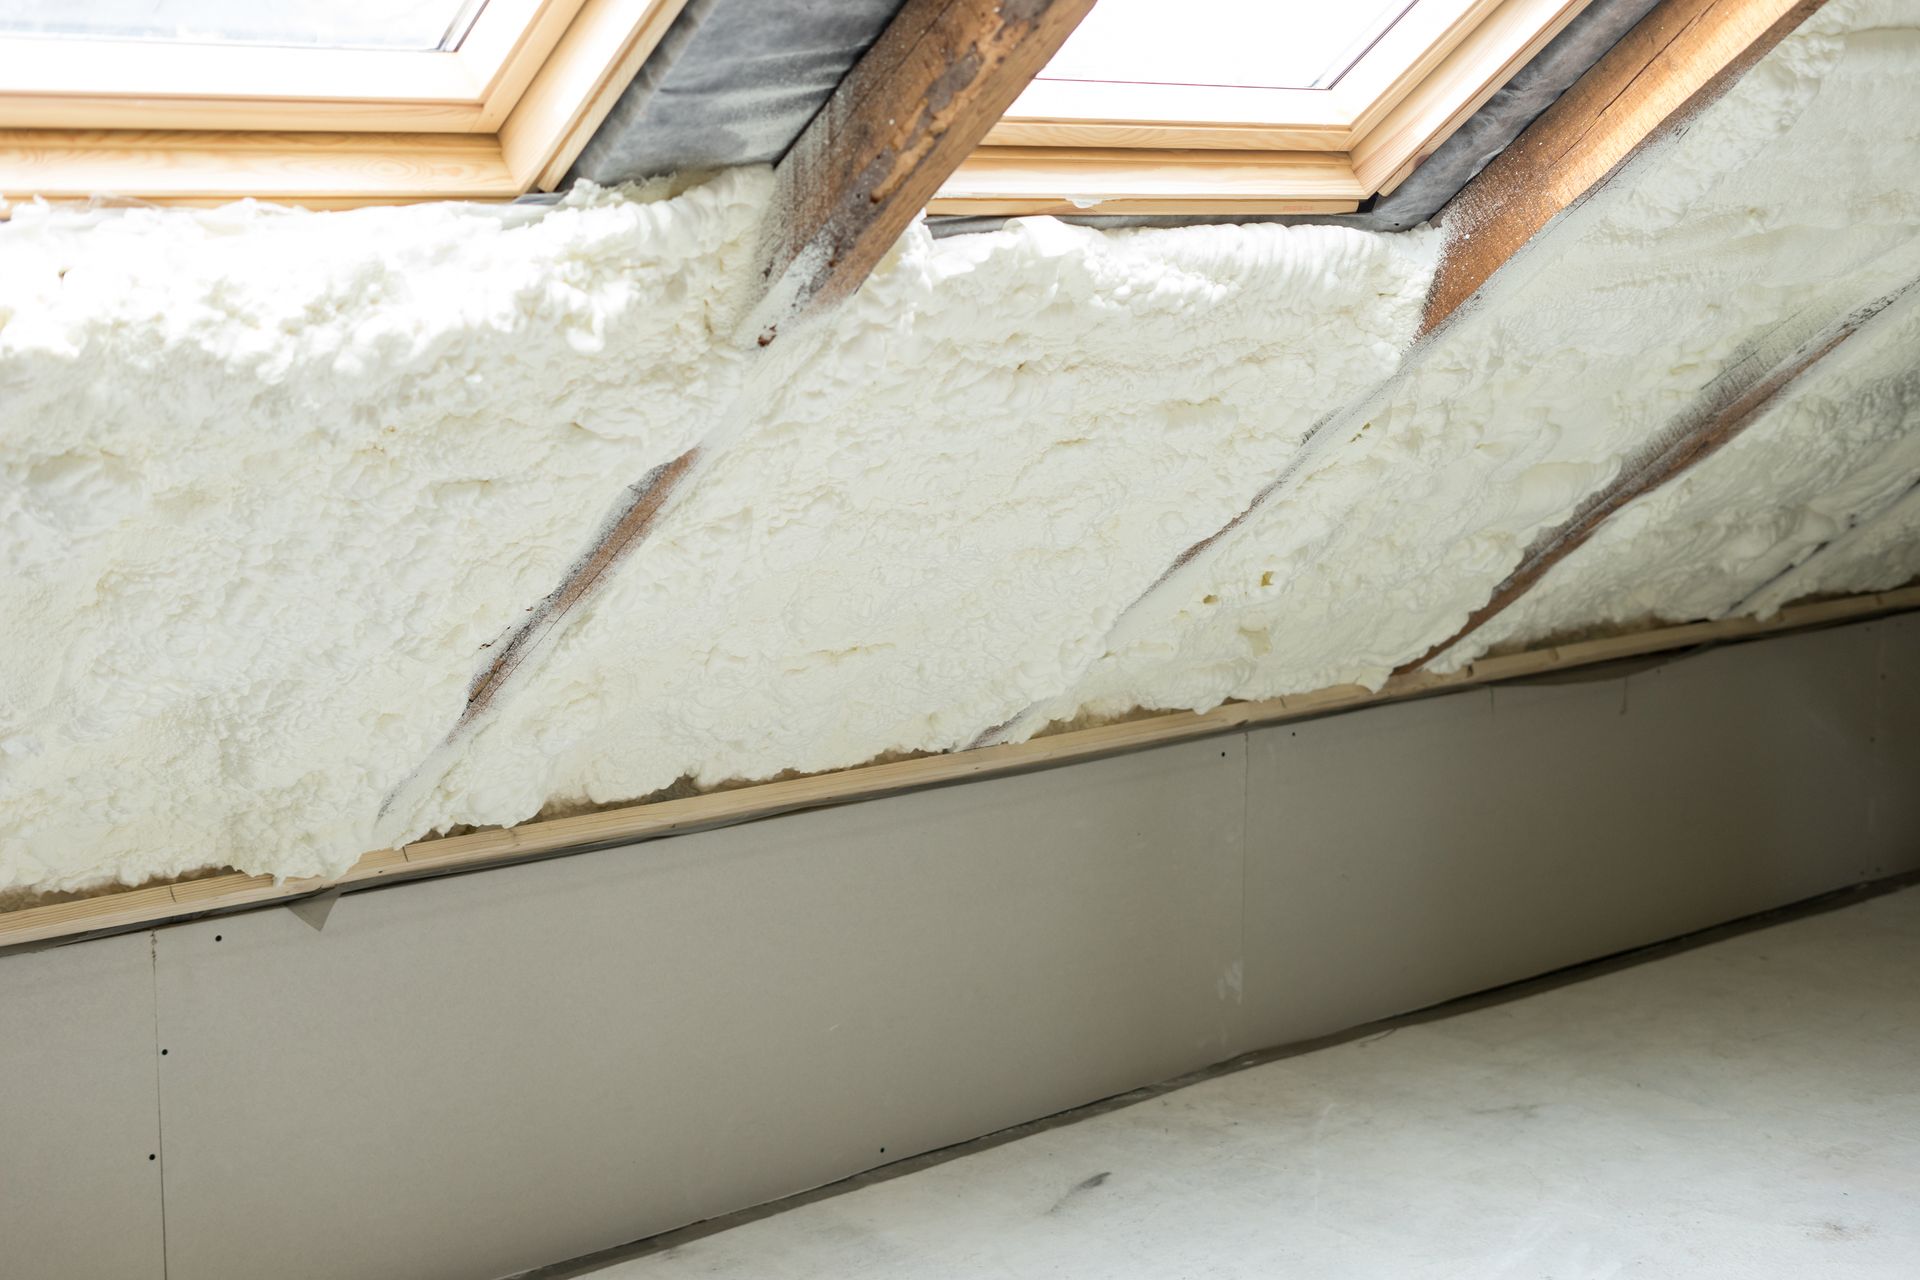 spray foam insulation on walls during home renovation